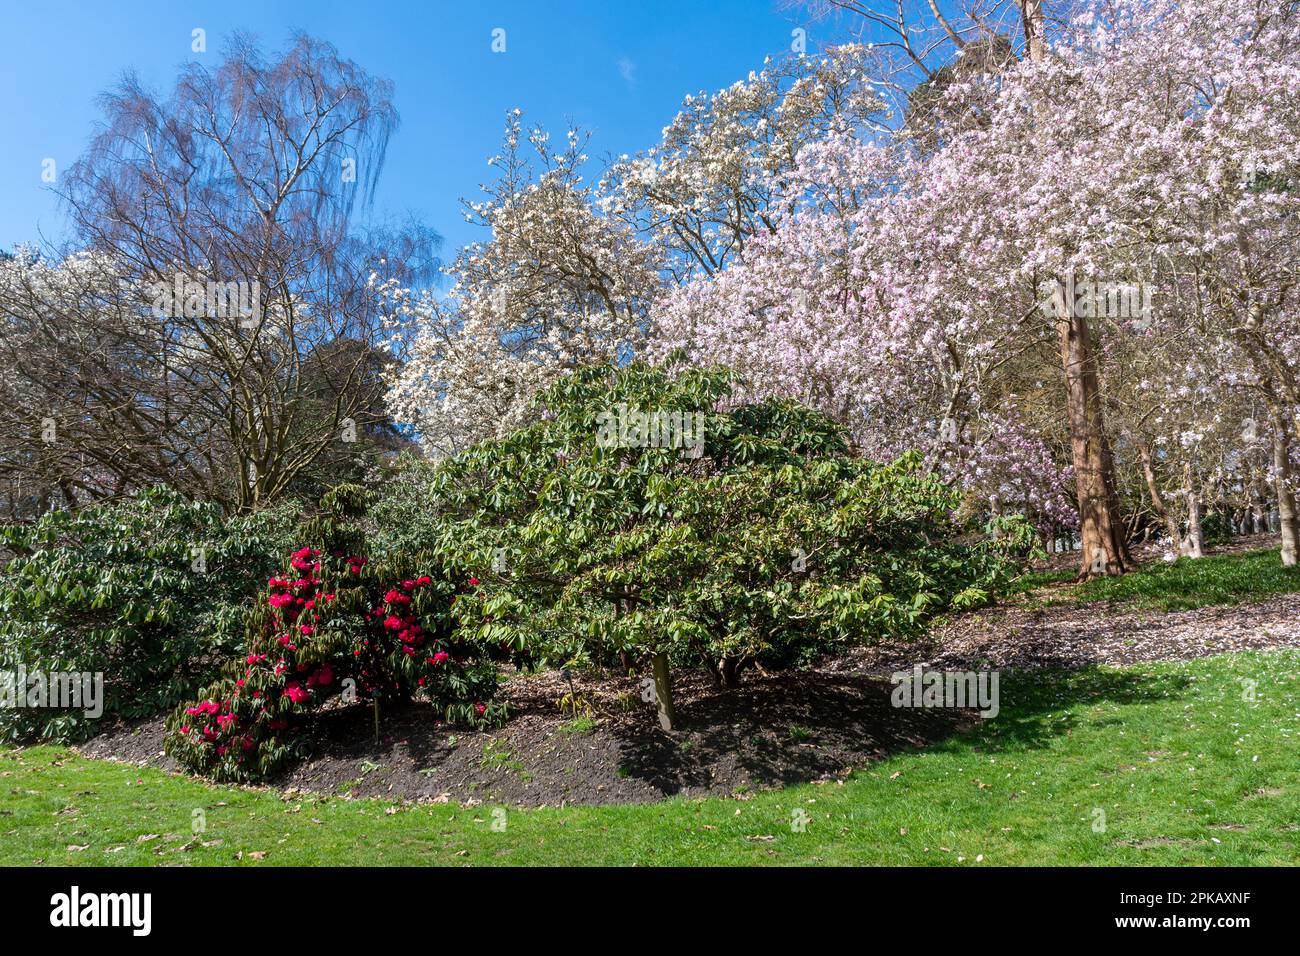 View of Valley Gardens during spring or April with flowering magnolia trees and rhododendrons, in Windsor Great Park, Surrey, England, UK Stock Photo